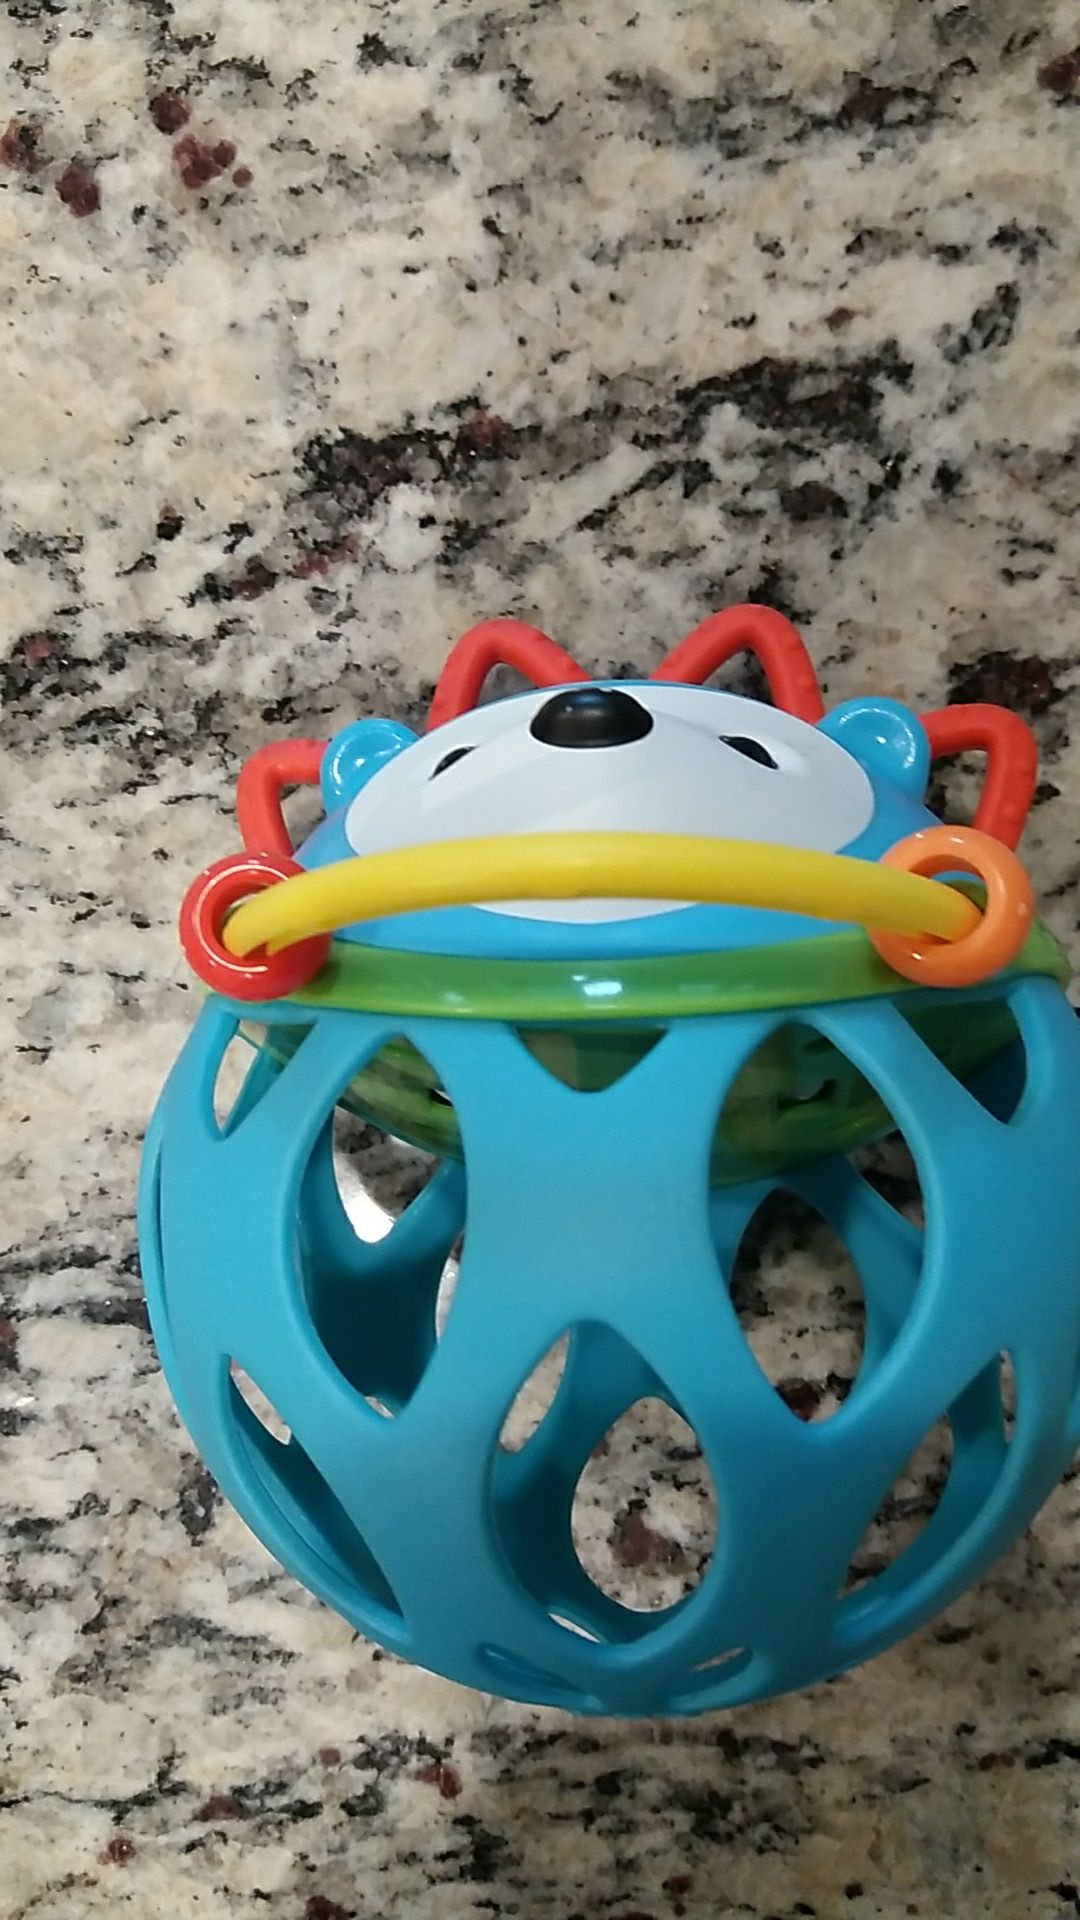 Baby toy ball